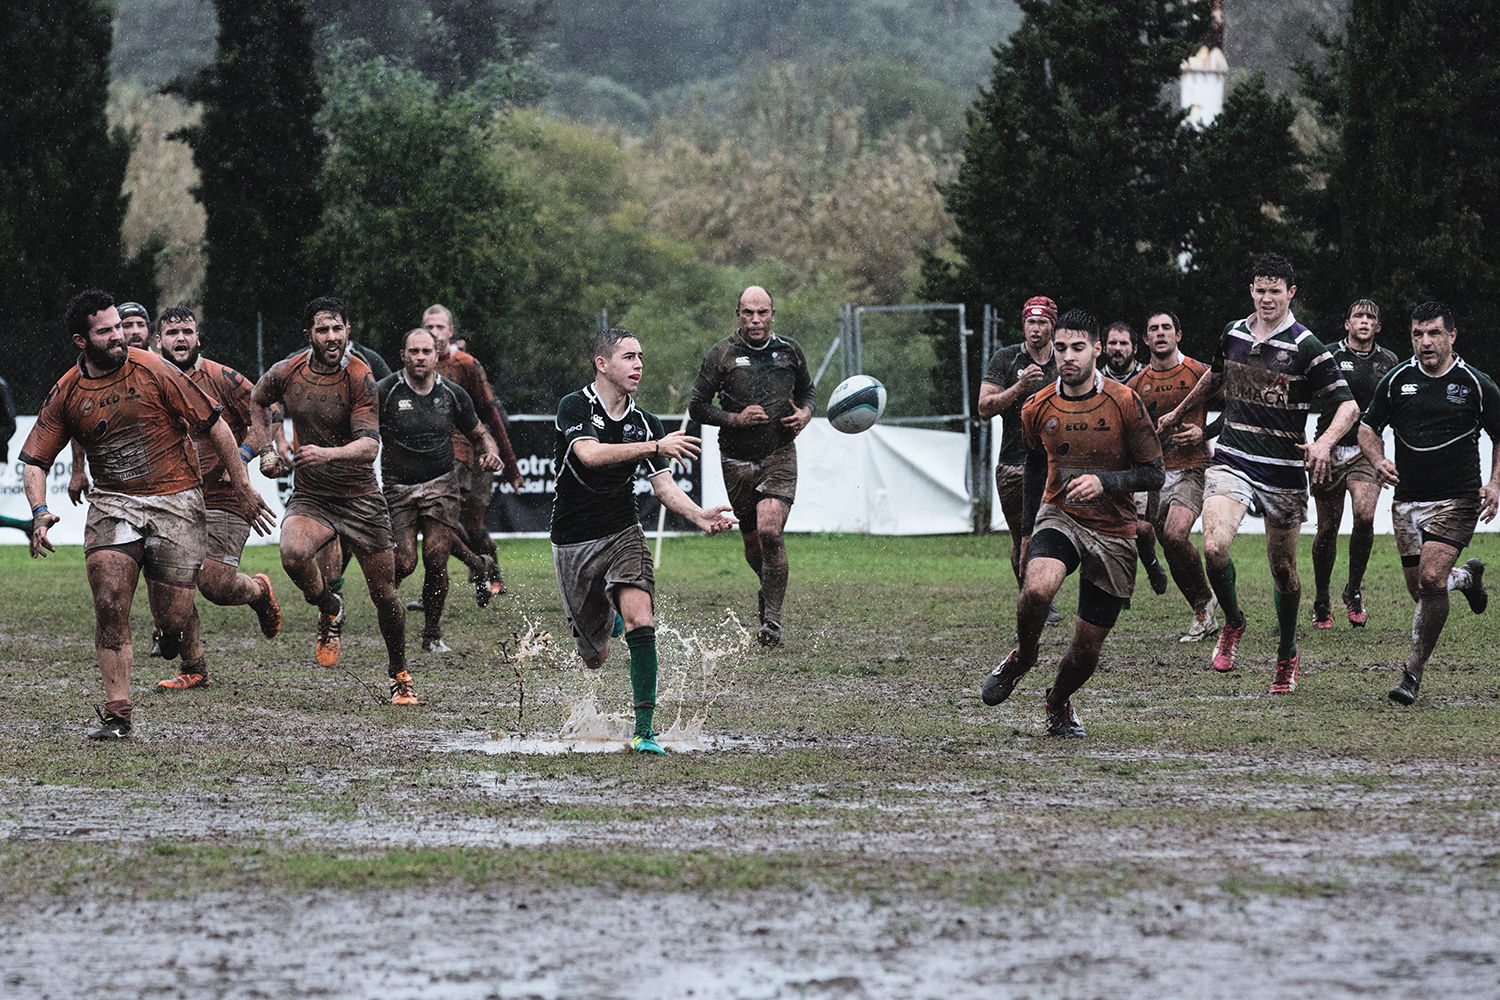 Players in rugby match passing the ball